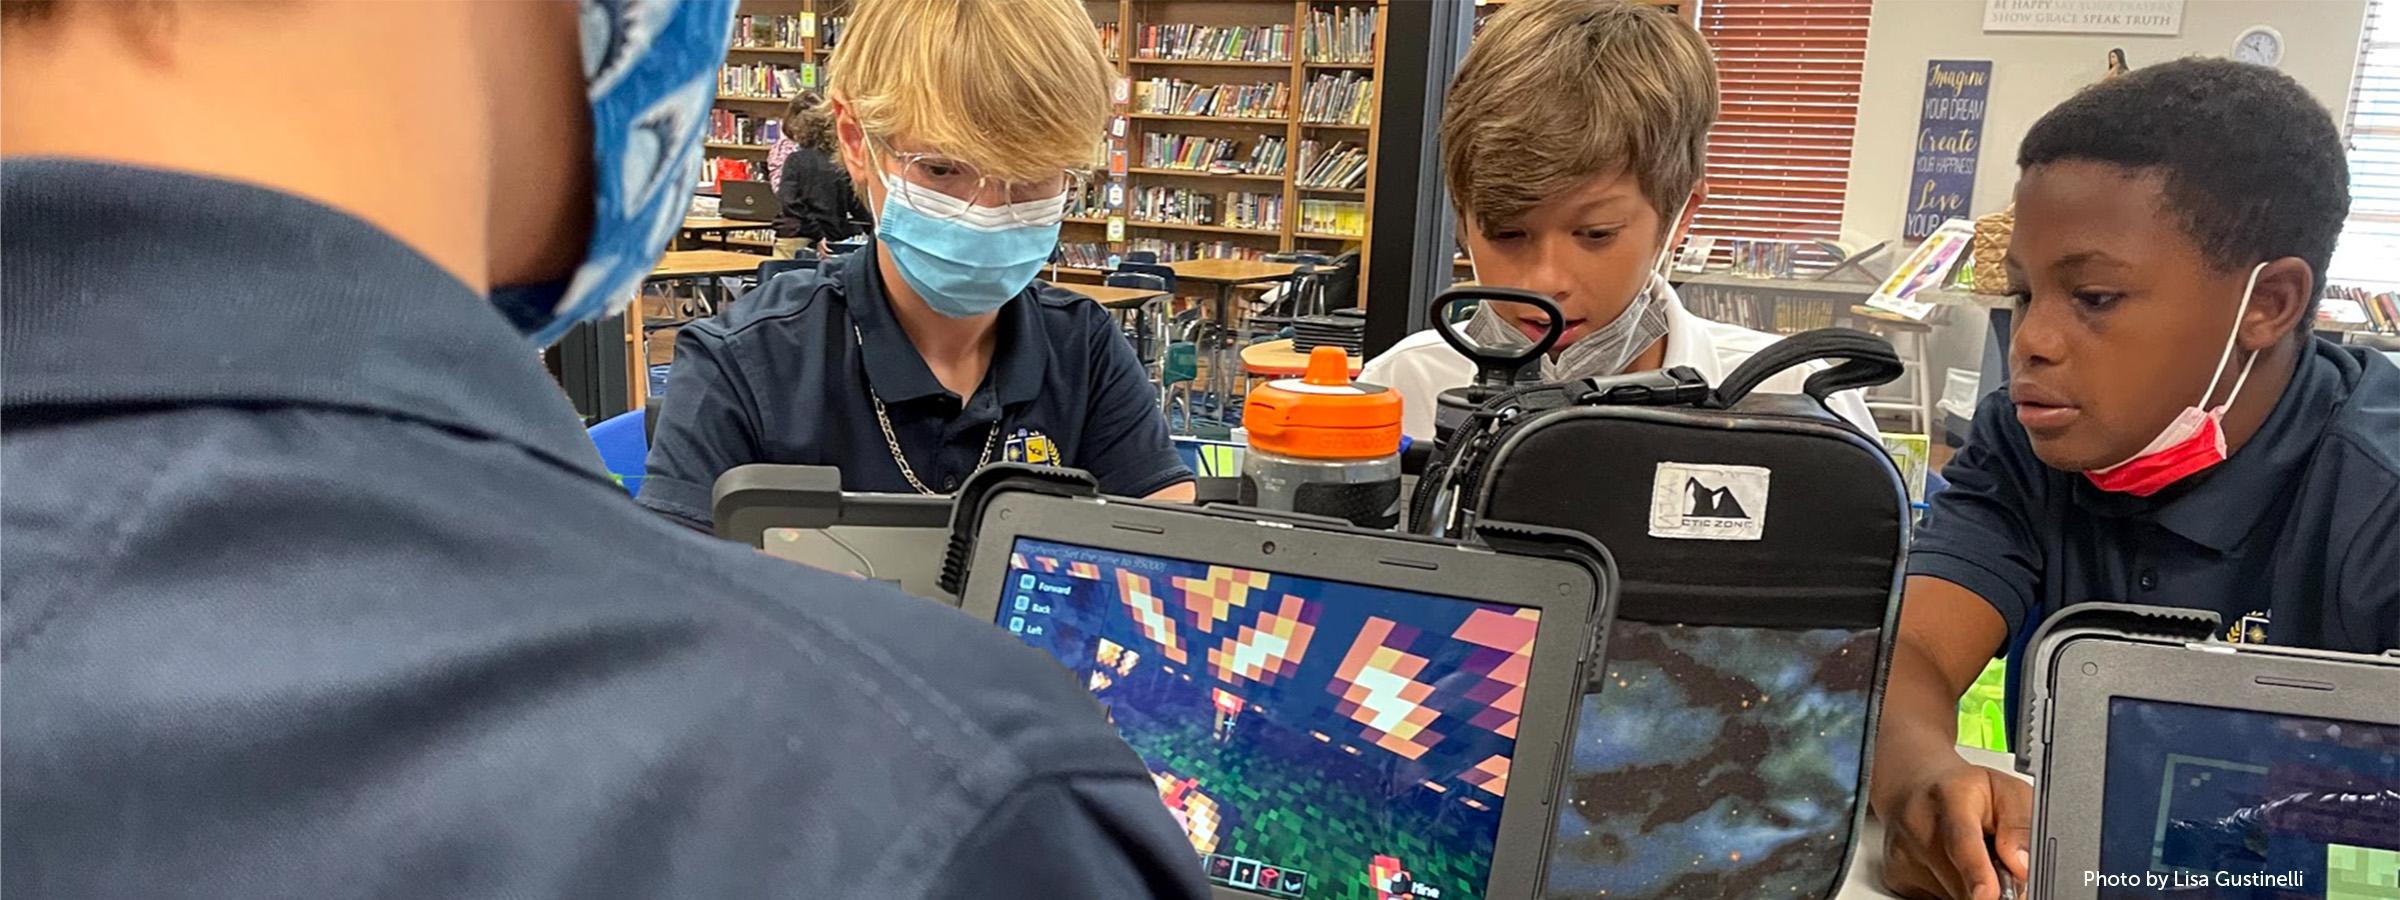 Four middle school students play minecraft on their laptops